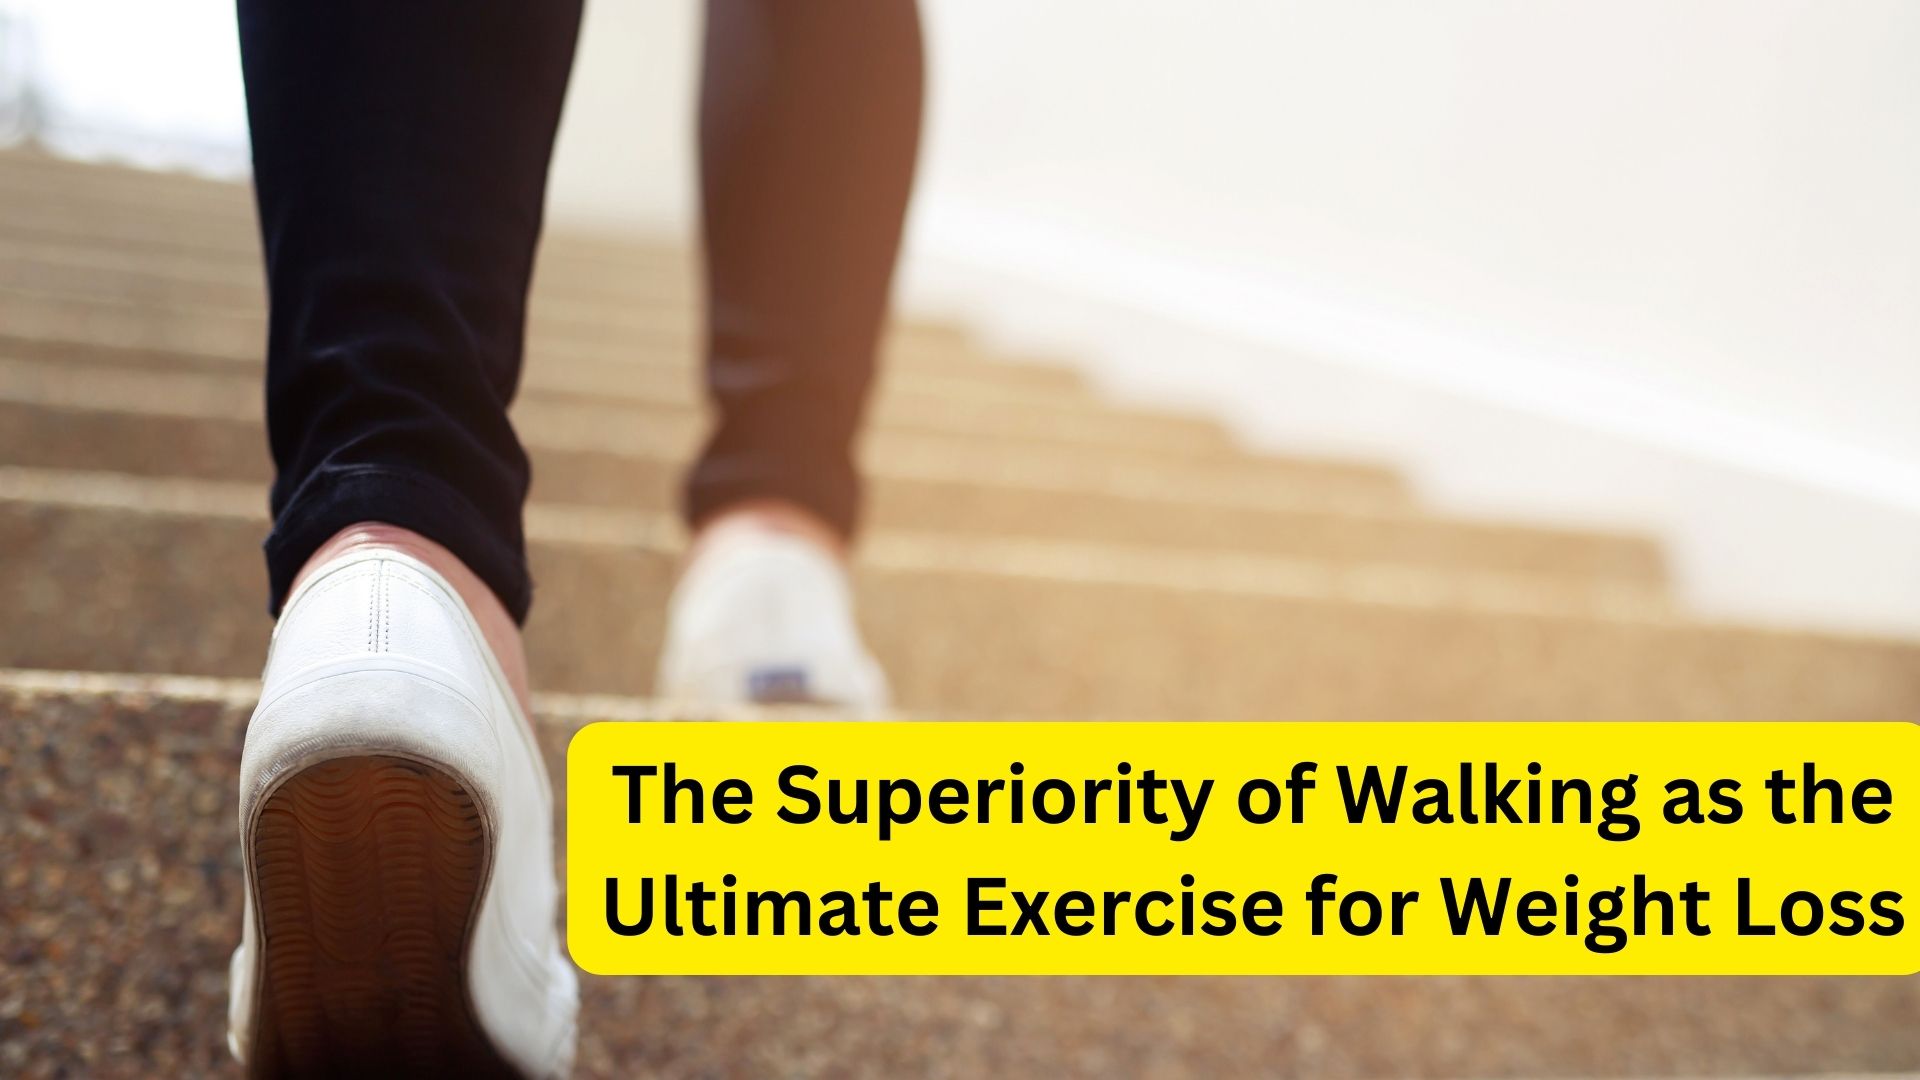 The Superiority of Walking as the Ultimate Exercise for Weight Loss